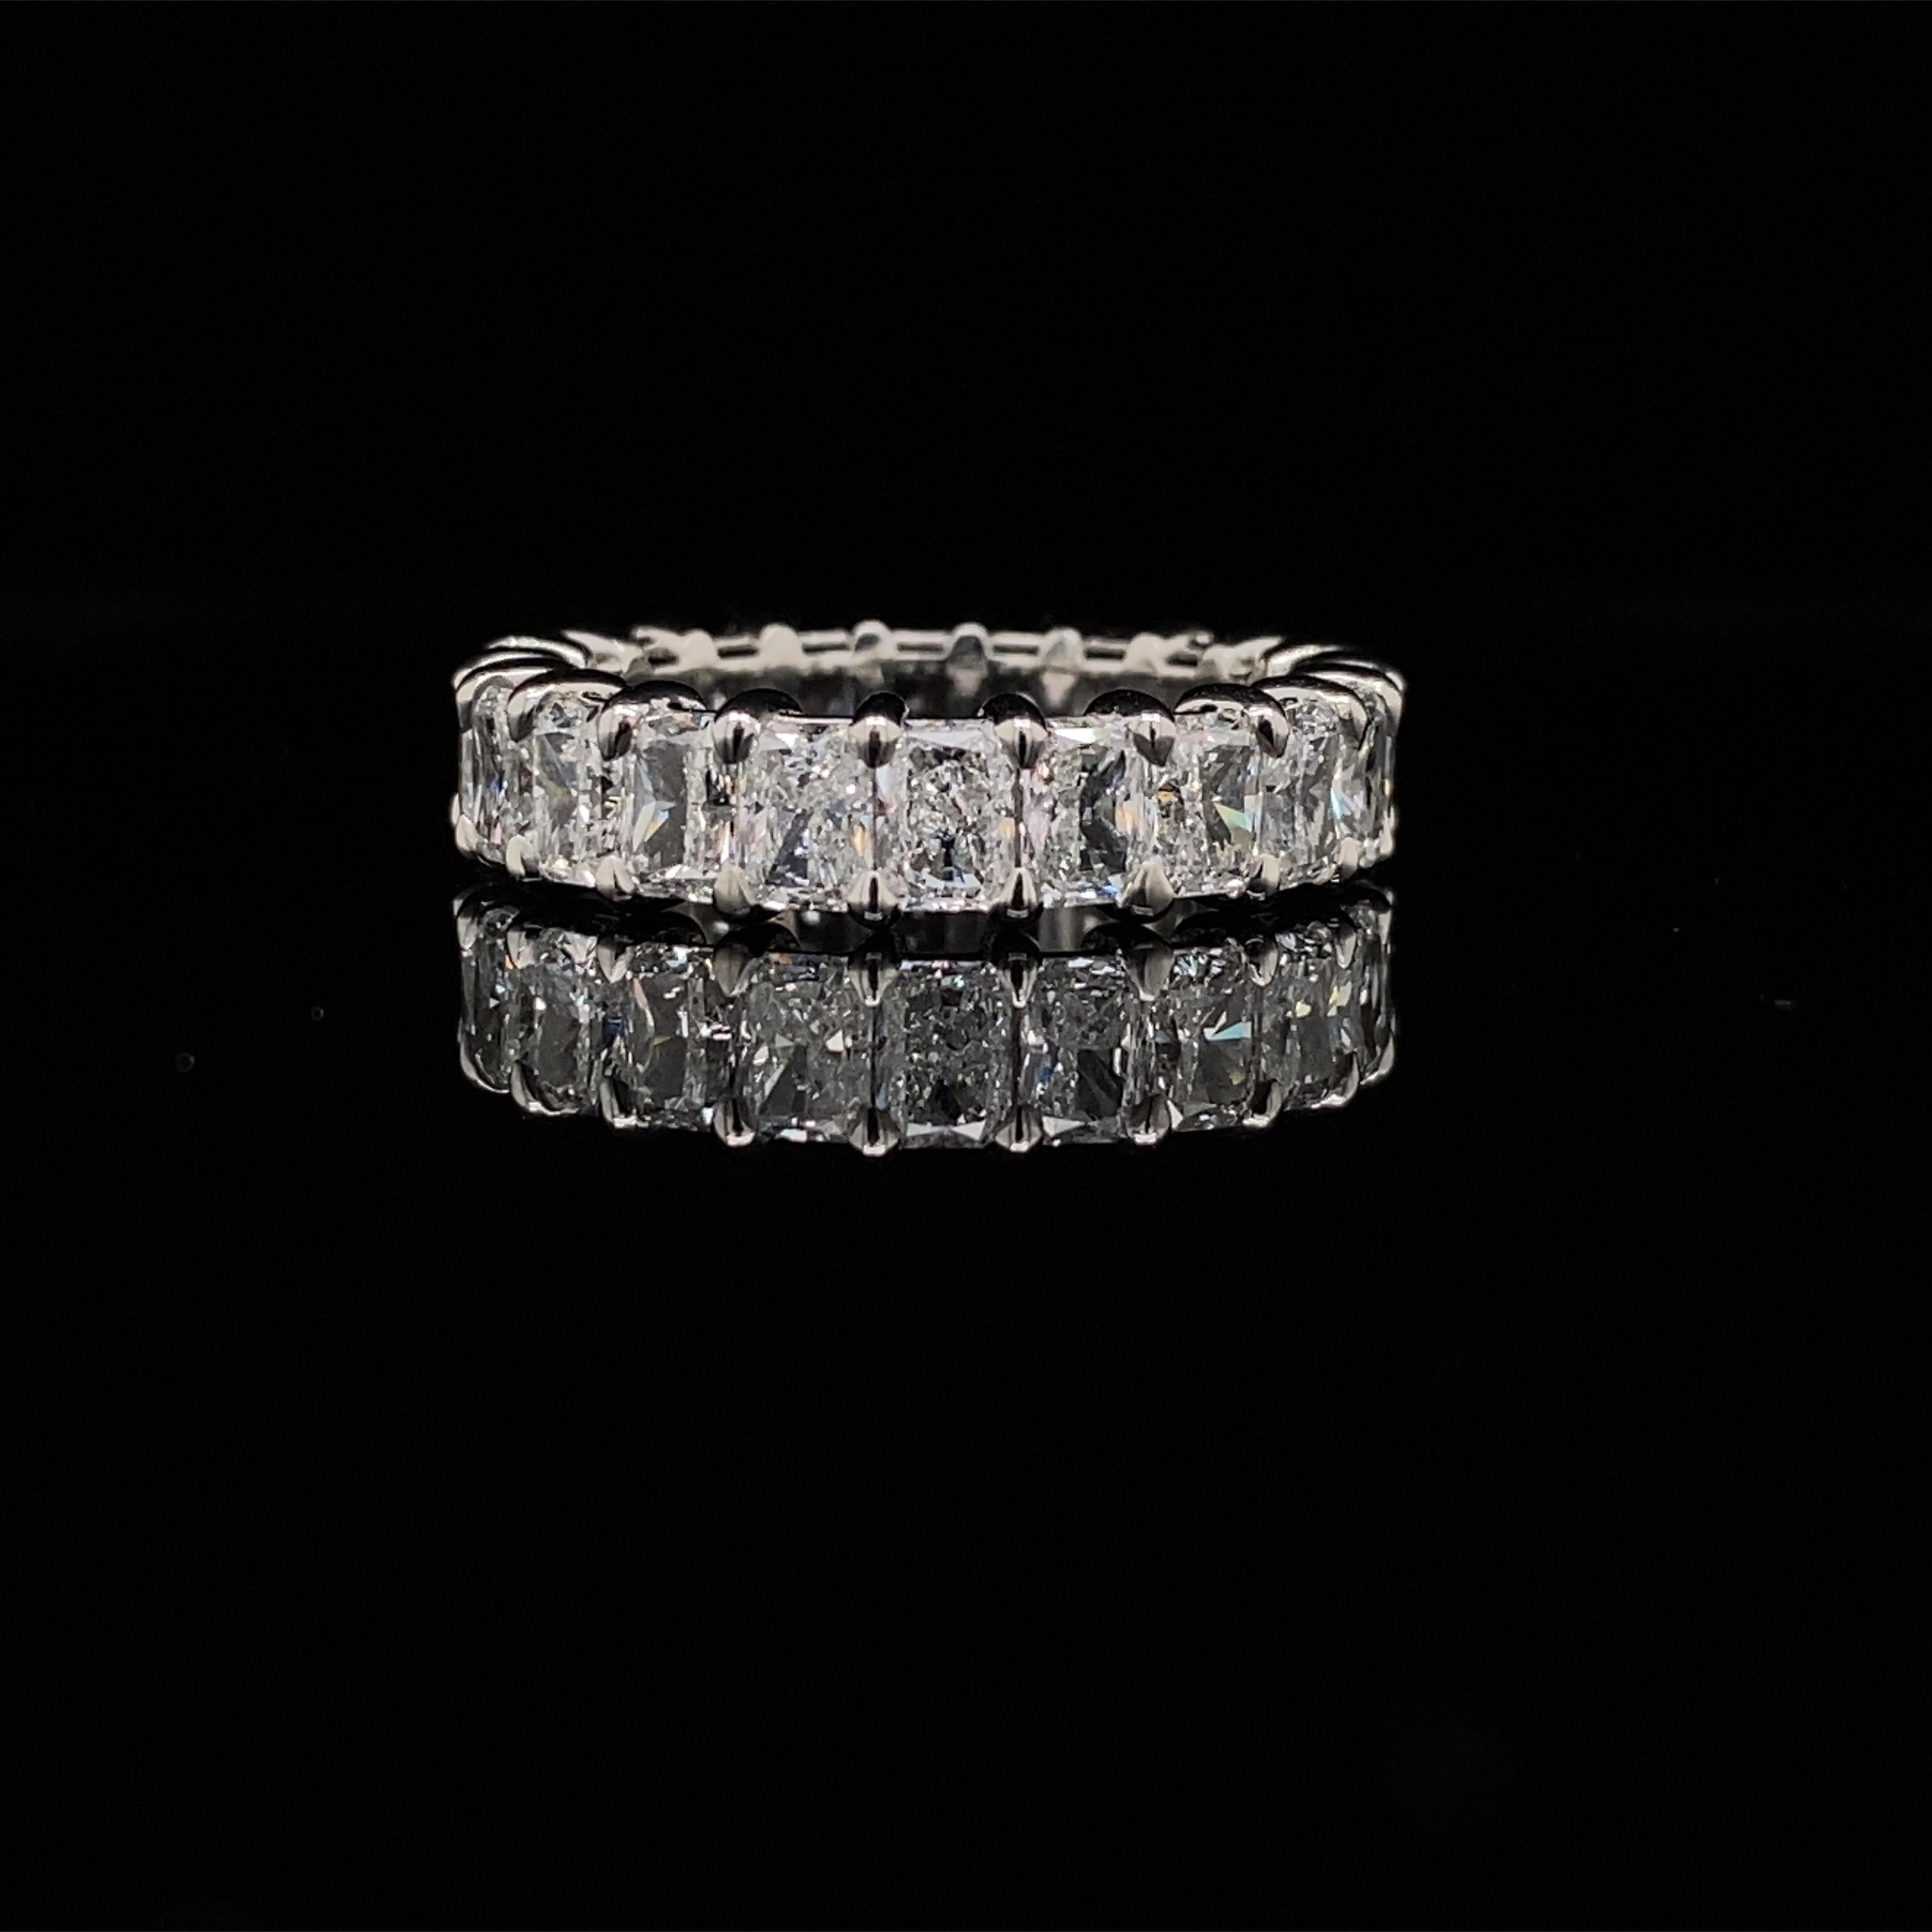 This Radiant Diamond Ring has 22 Radiant Diamonds. The Diamonds have a total carat of 4.94.
The diamonds are F color VS clarity. The ring is a finger size 6.25 and is set in Platinum.